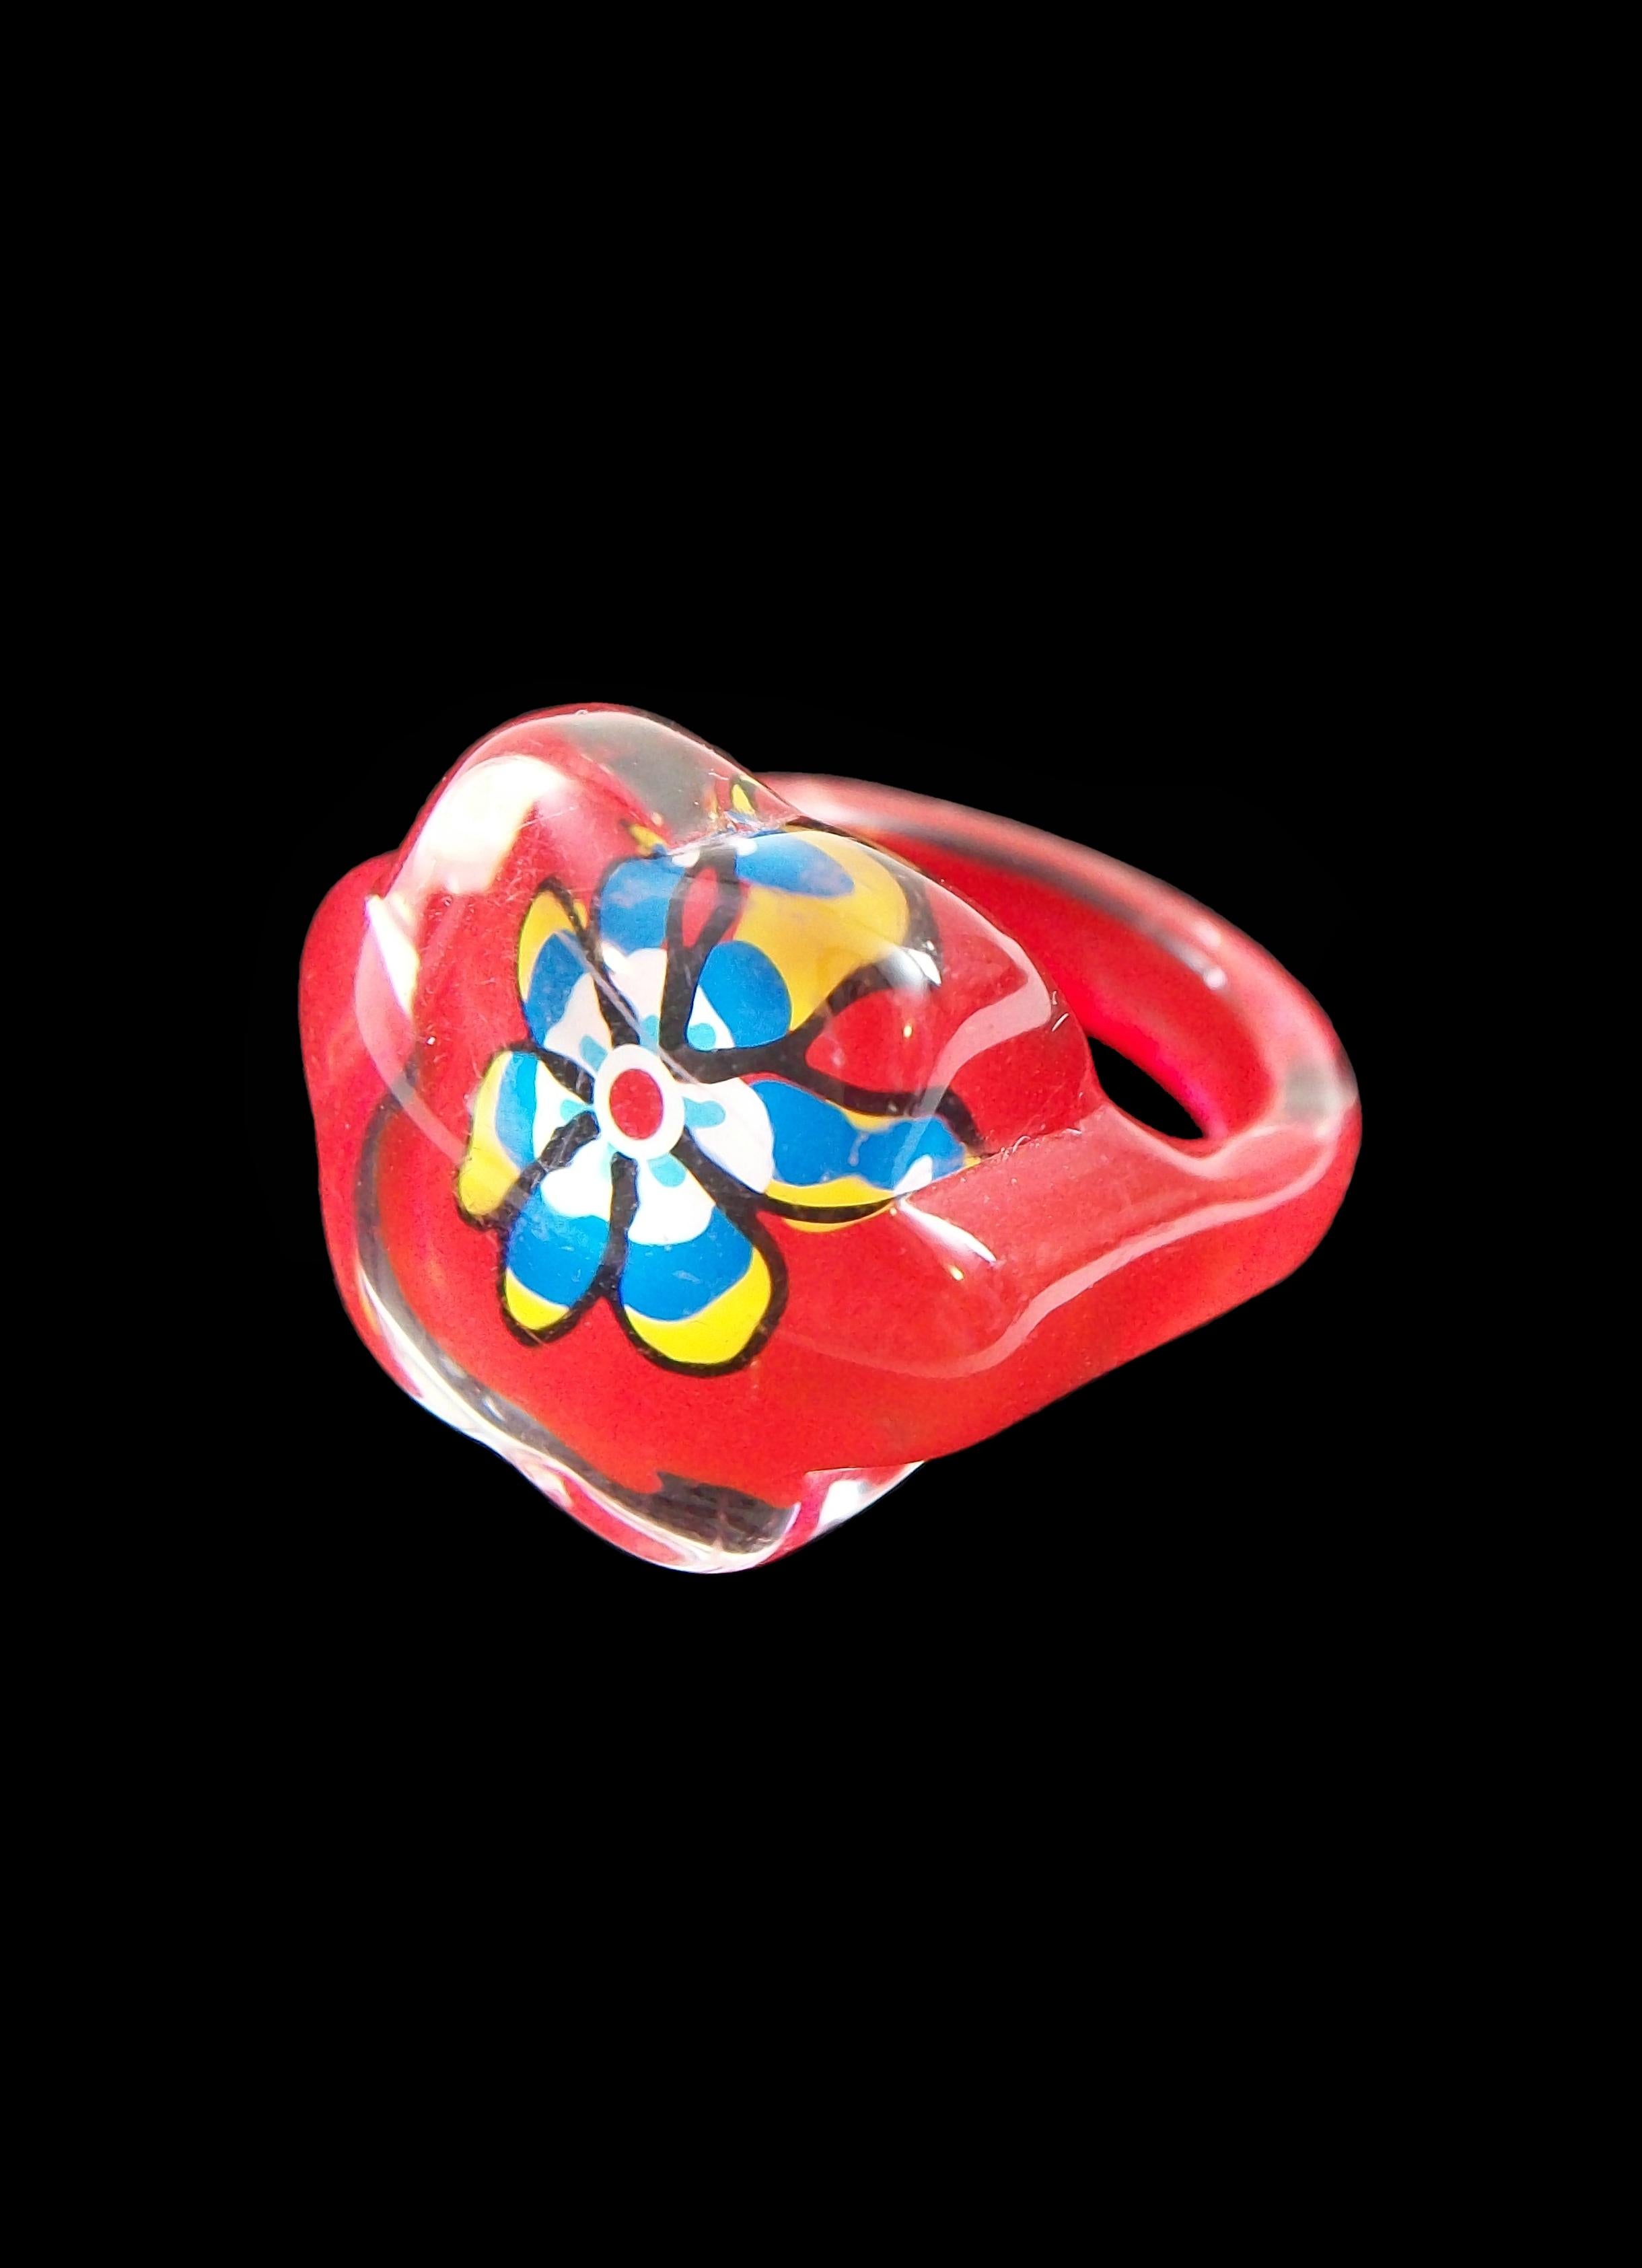 Vintage Pop Art back painted Lucite ring - featuring a hand painted flower with red background - size 7 3/4 (approximate) - unsigned - late 20th century.

Excellent vintage condition - numerous fine surface scratches from age and use (most evident